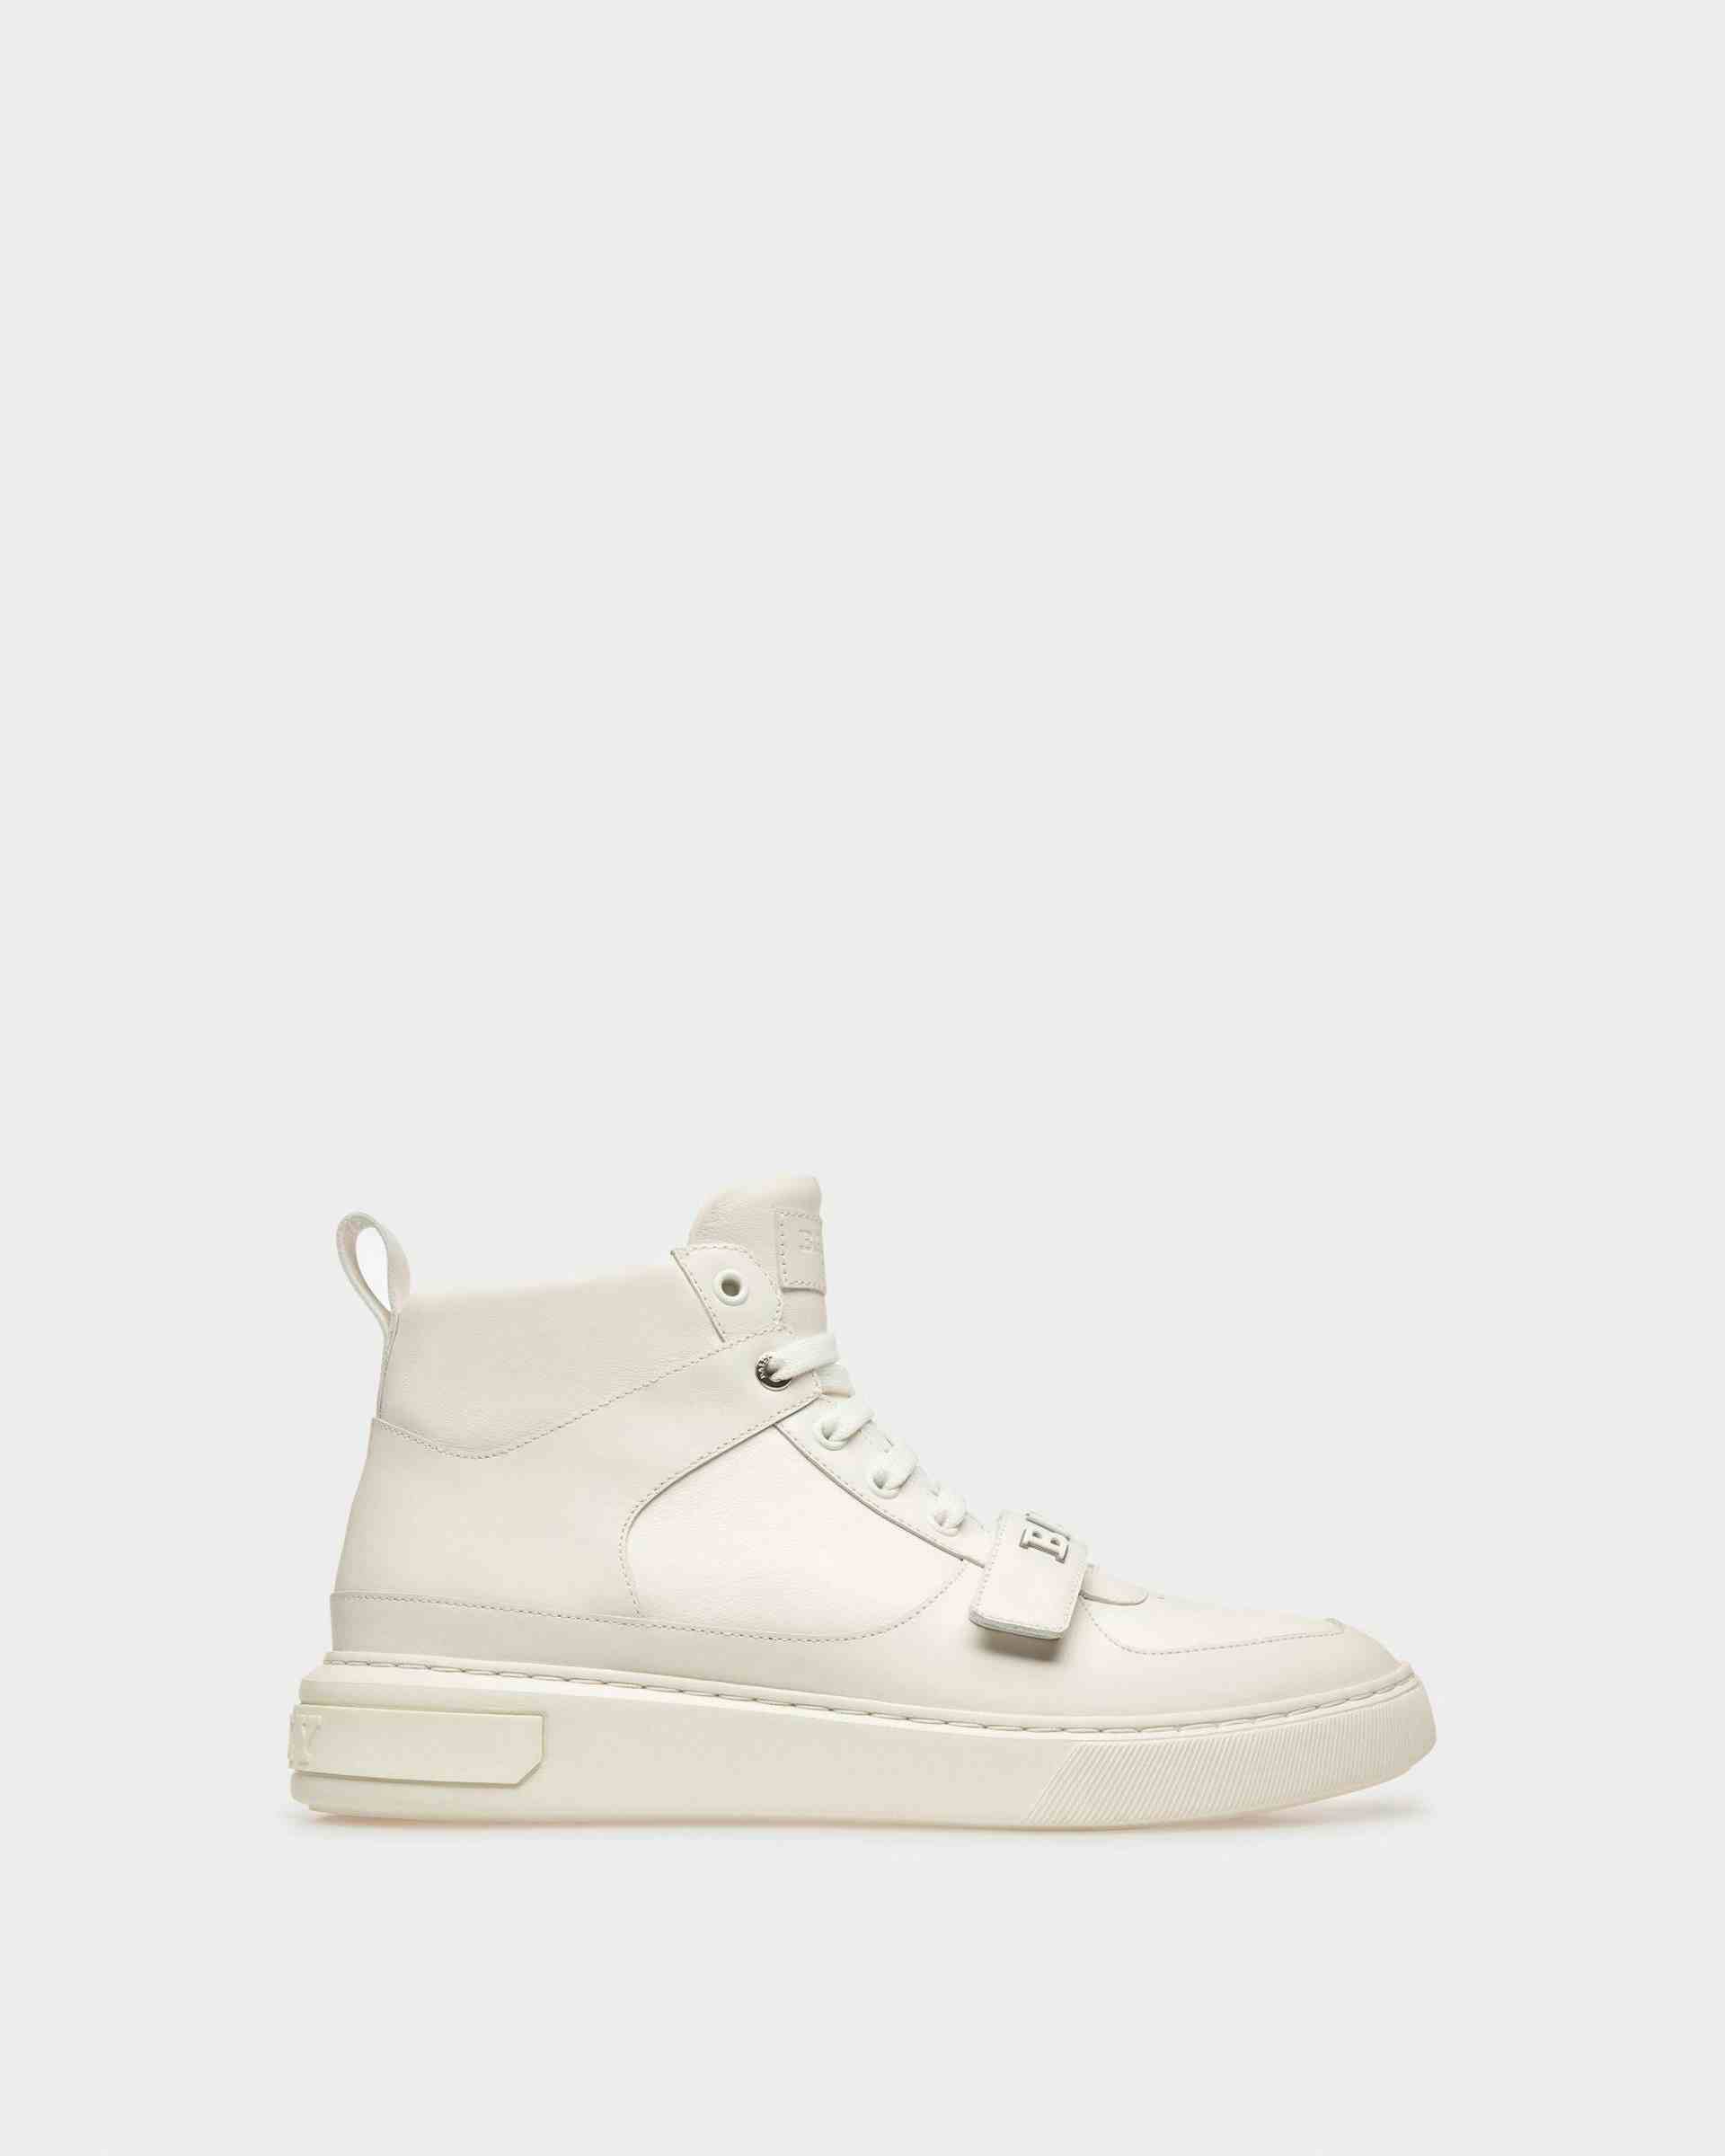 Merryk Leather Sneakers In White - Men's - Bally